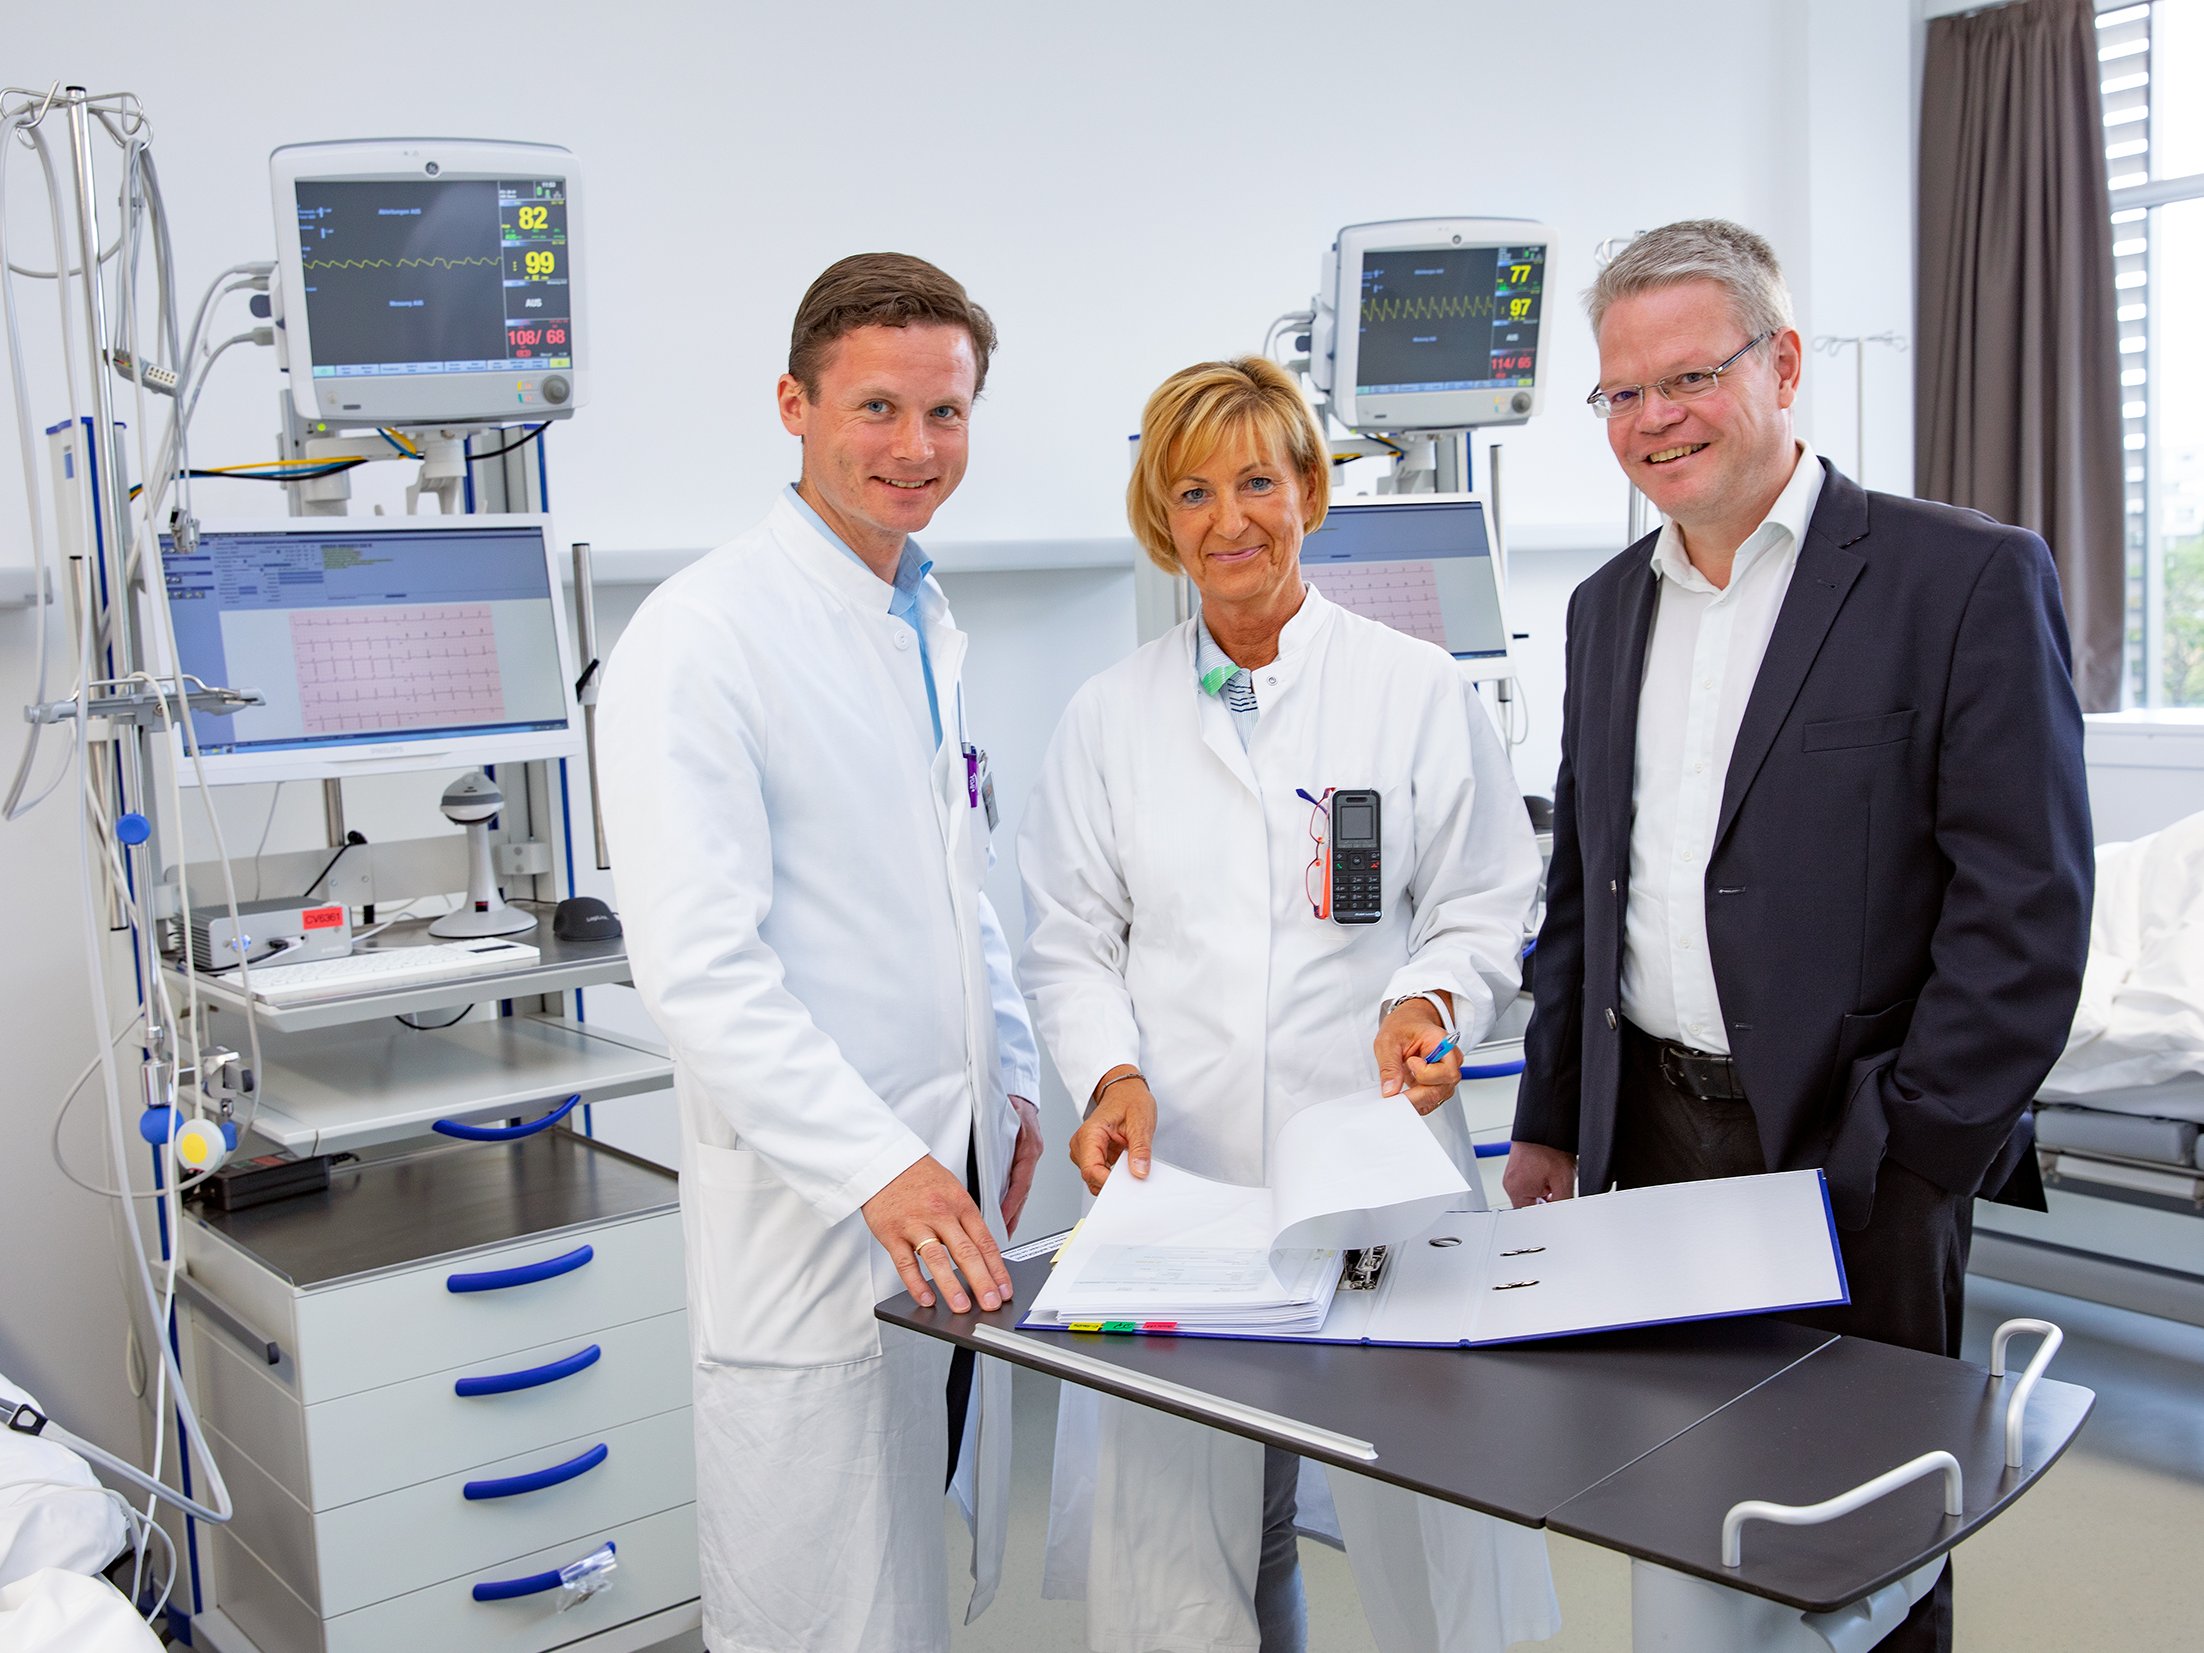 Prof. Dr. Christoph Schindler (from right to left), the head study nurse Carola Westenberg and investigator Dr. Macus May. Copyright: MHH / Karin Kaiser.